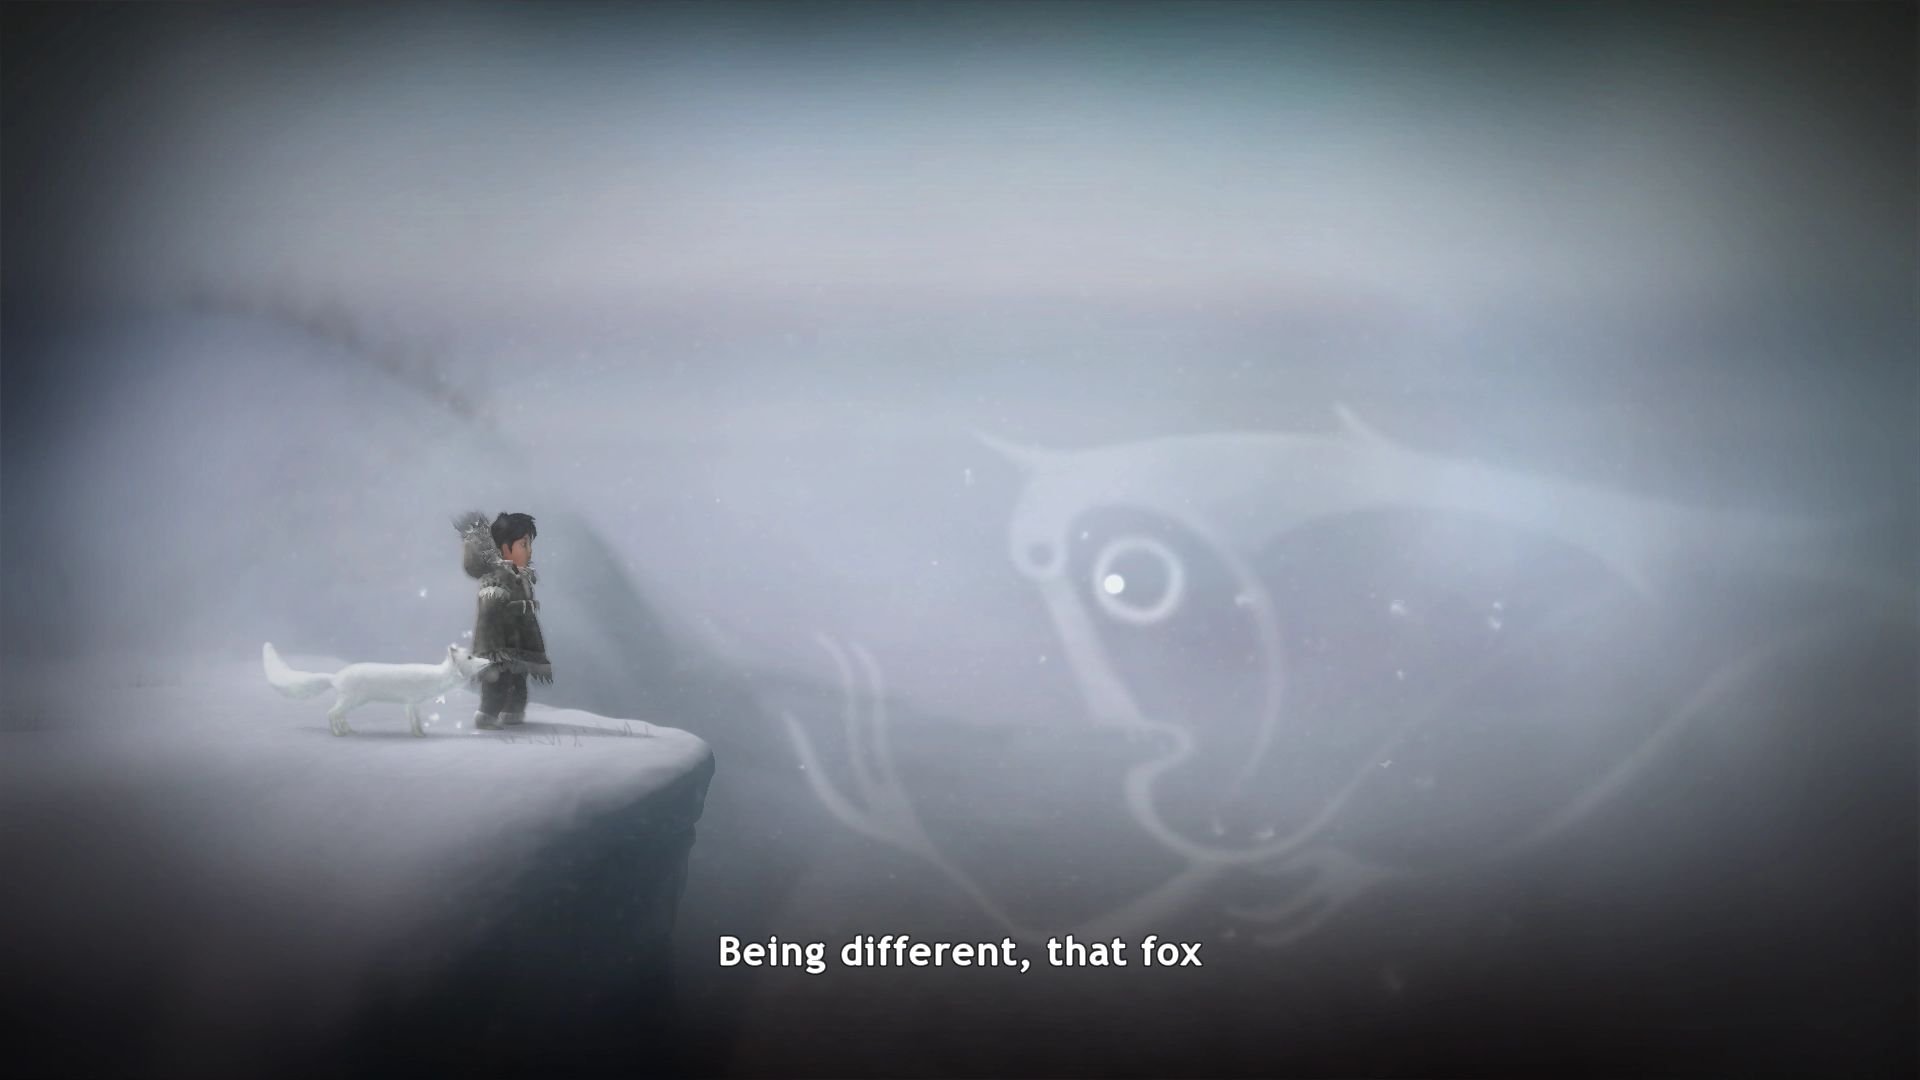 Never Alone for Xbox One